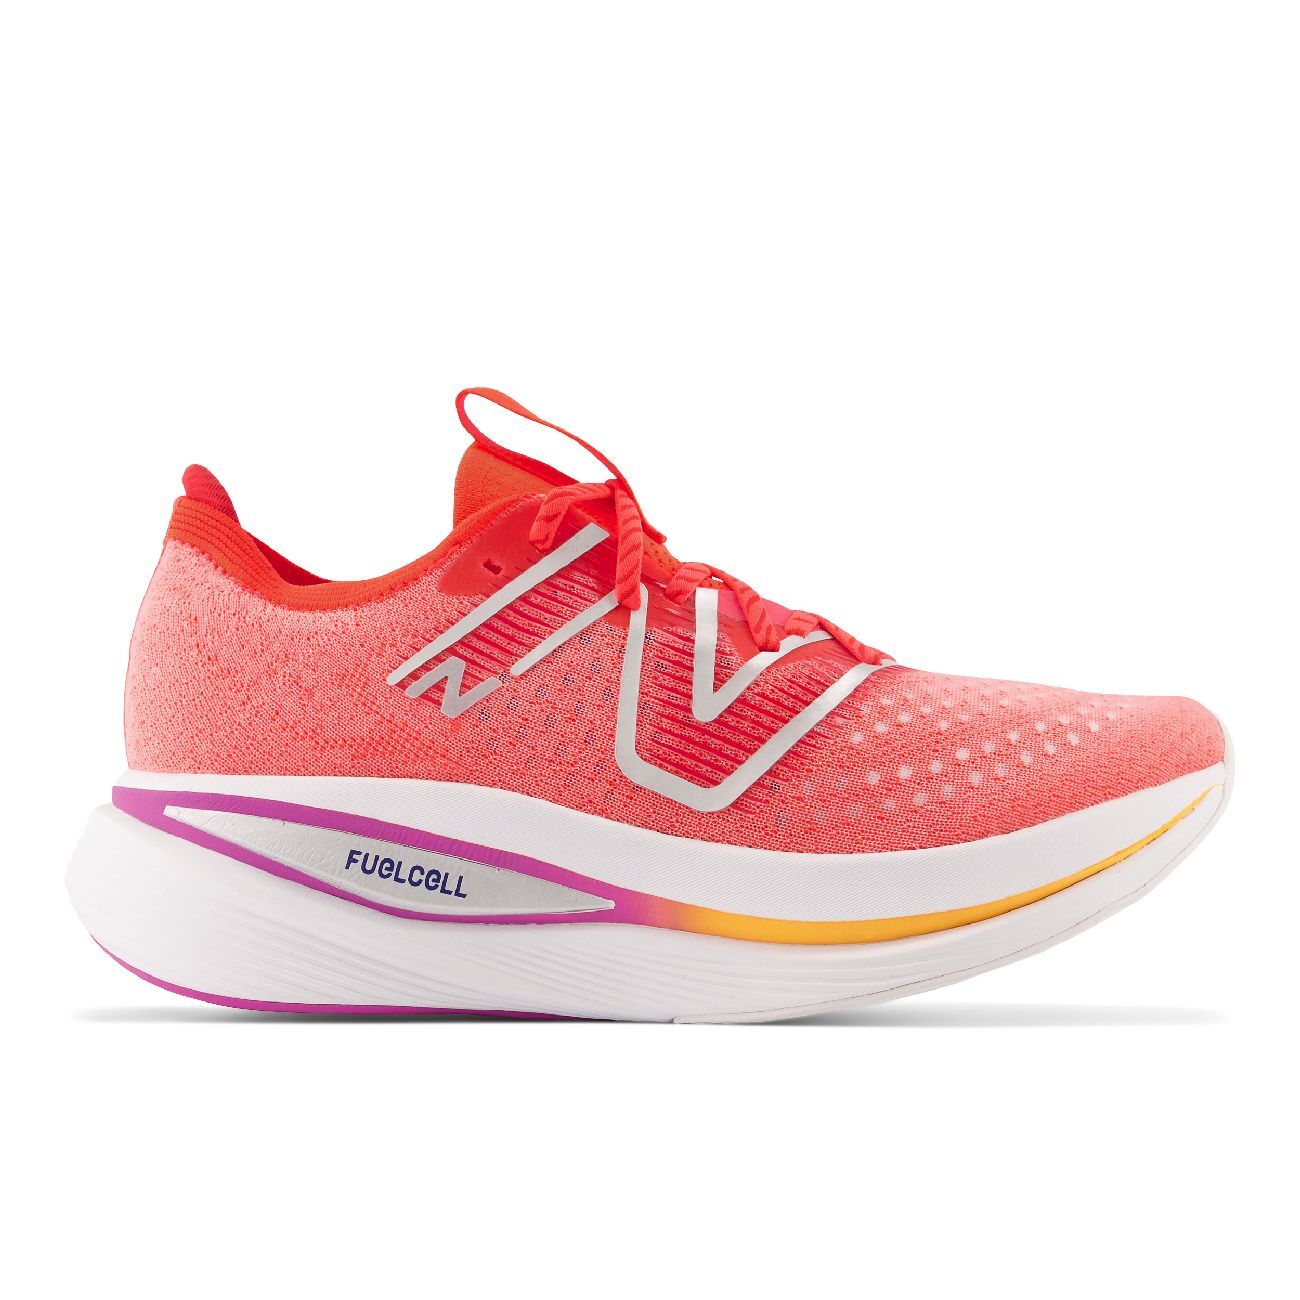 New Balance Fuelcell SC Trainer V2 - Buty do biegania meskie | Hardloop